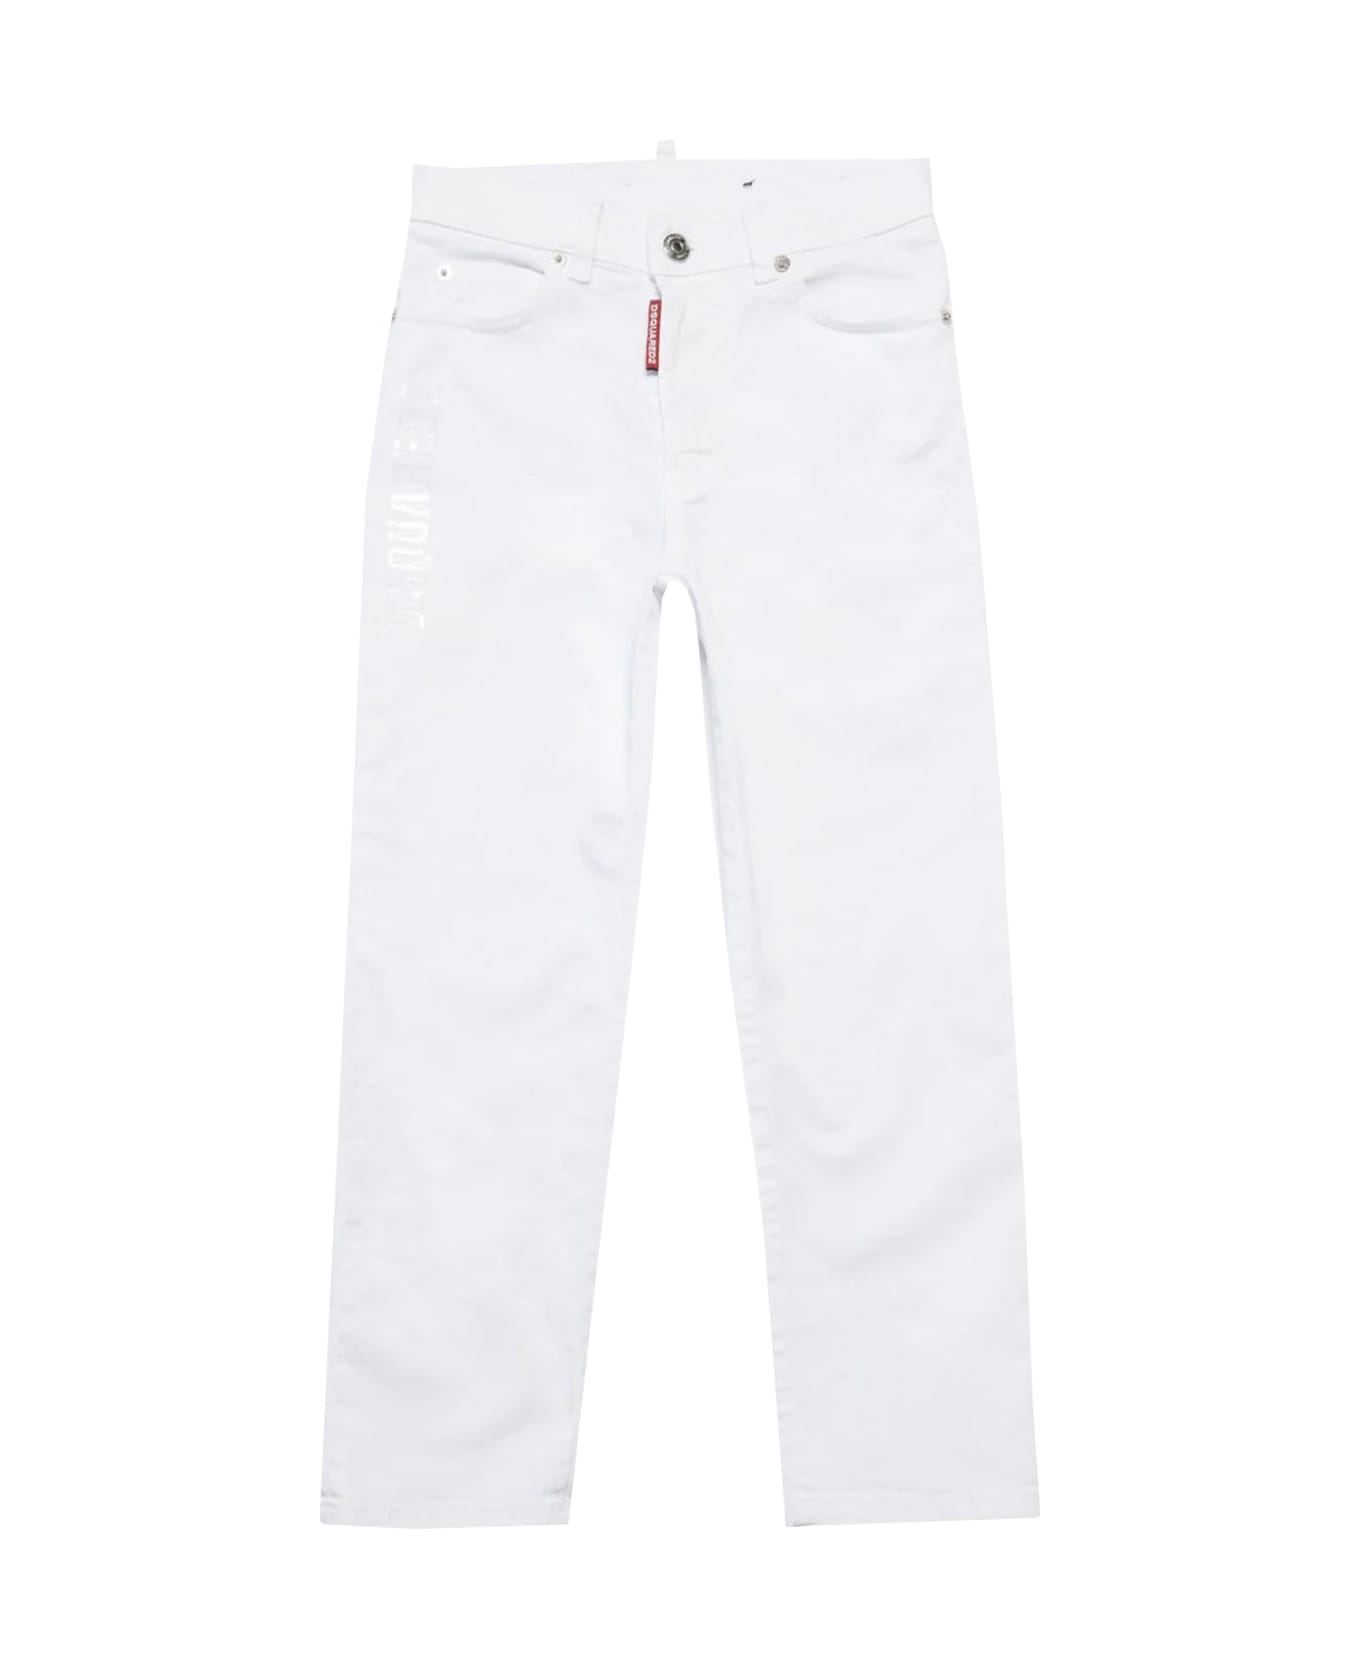 Dsquared2 Stretch Cotton Pants - White ボトムス